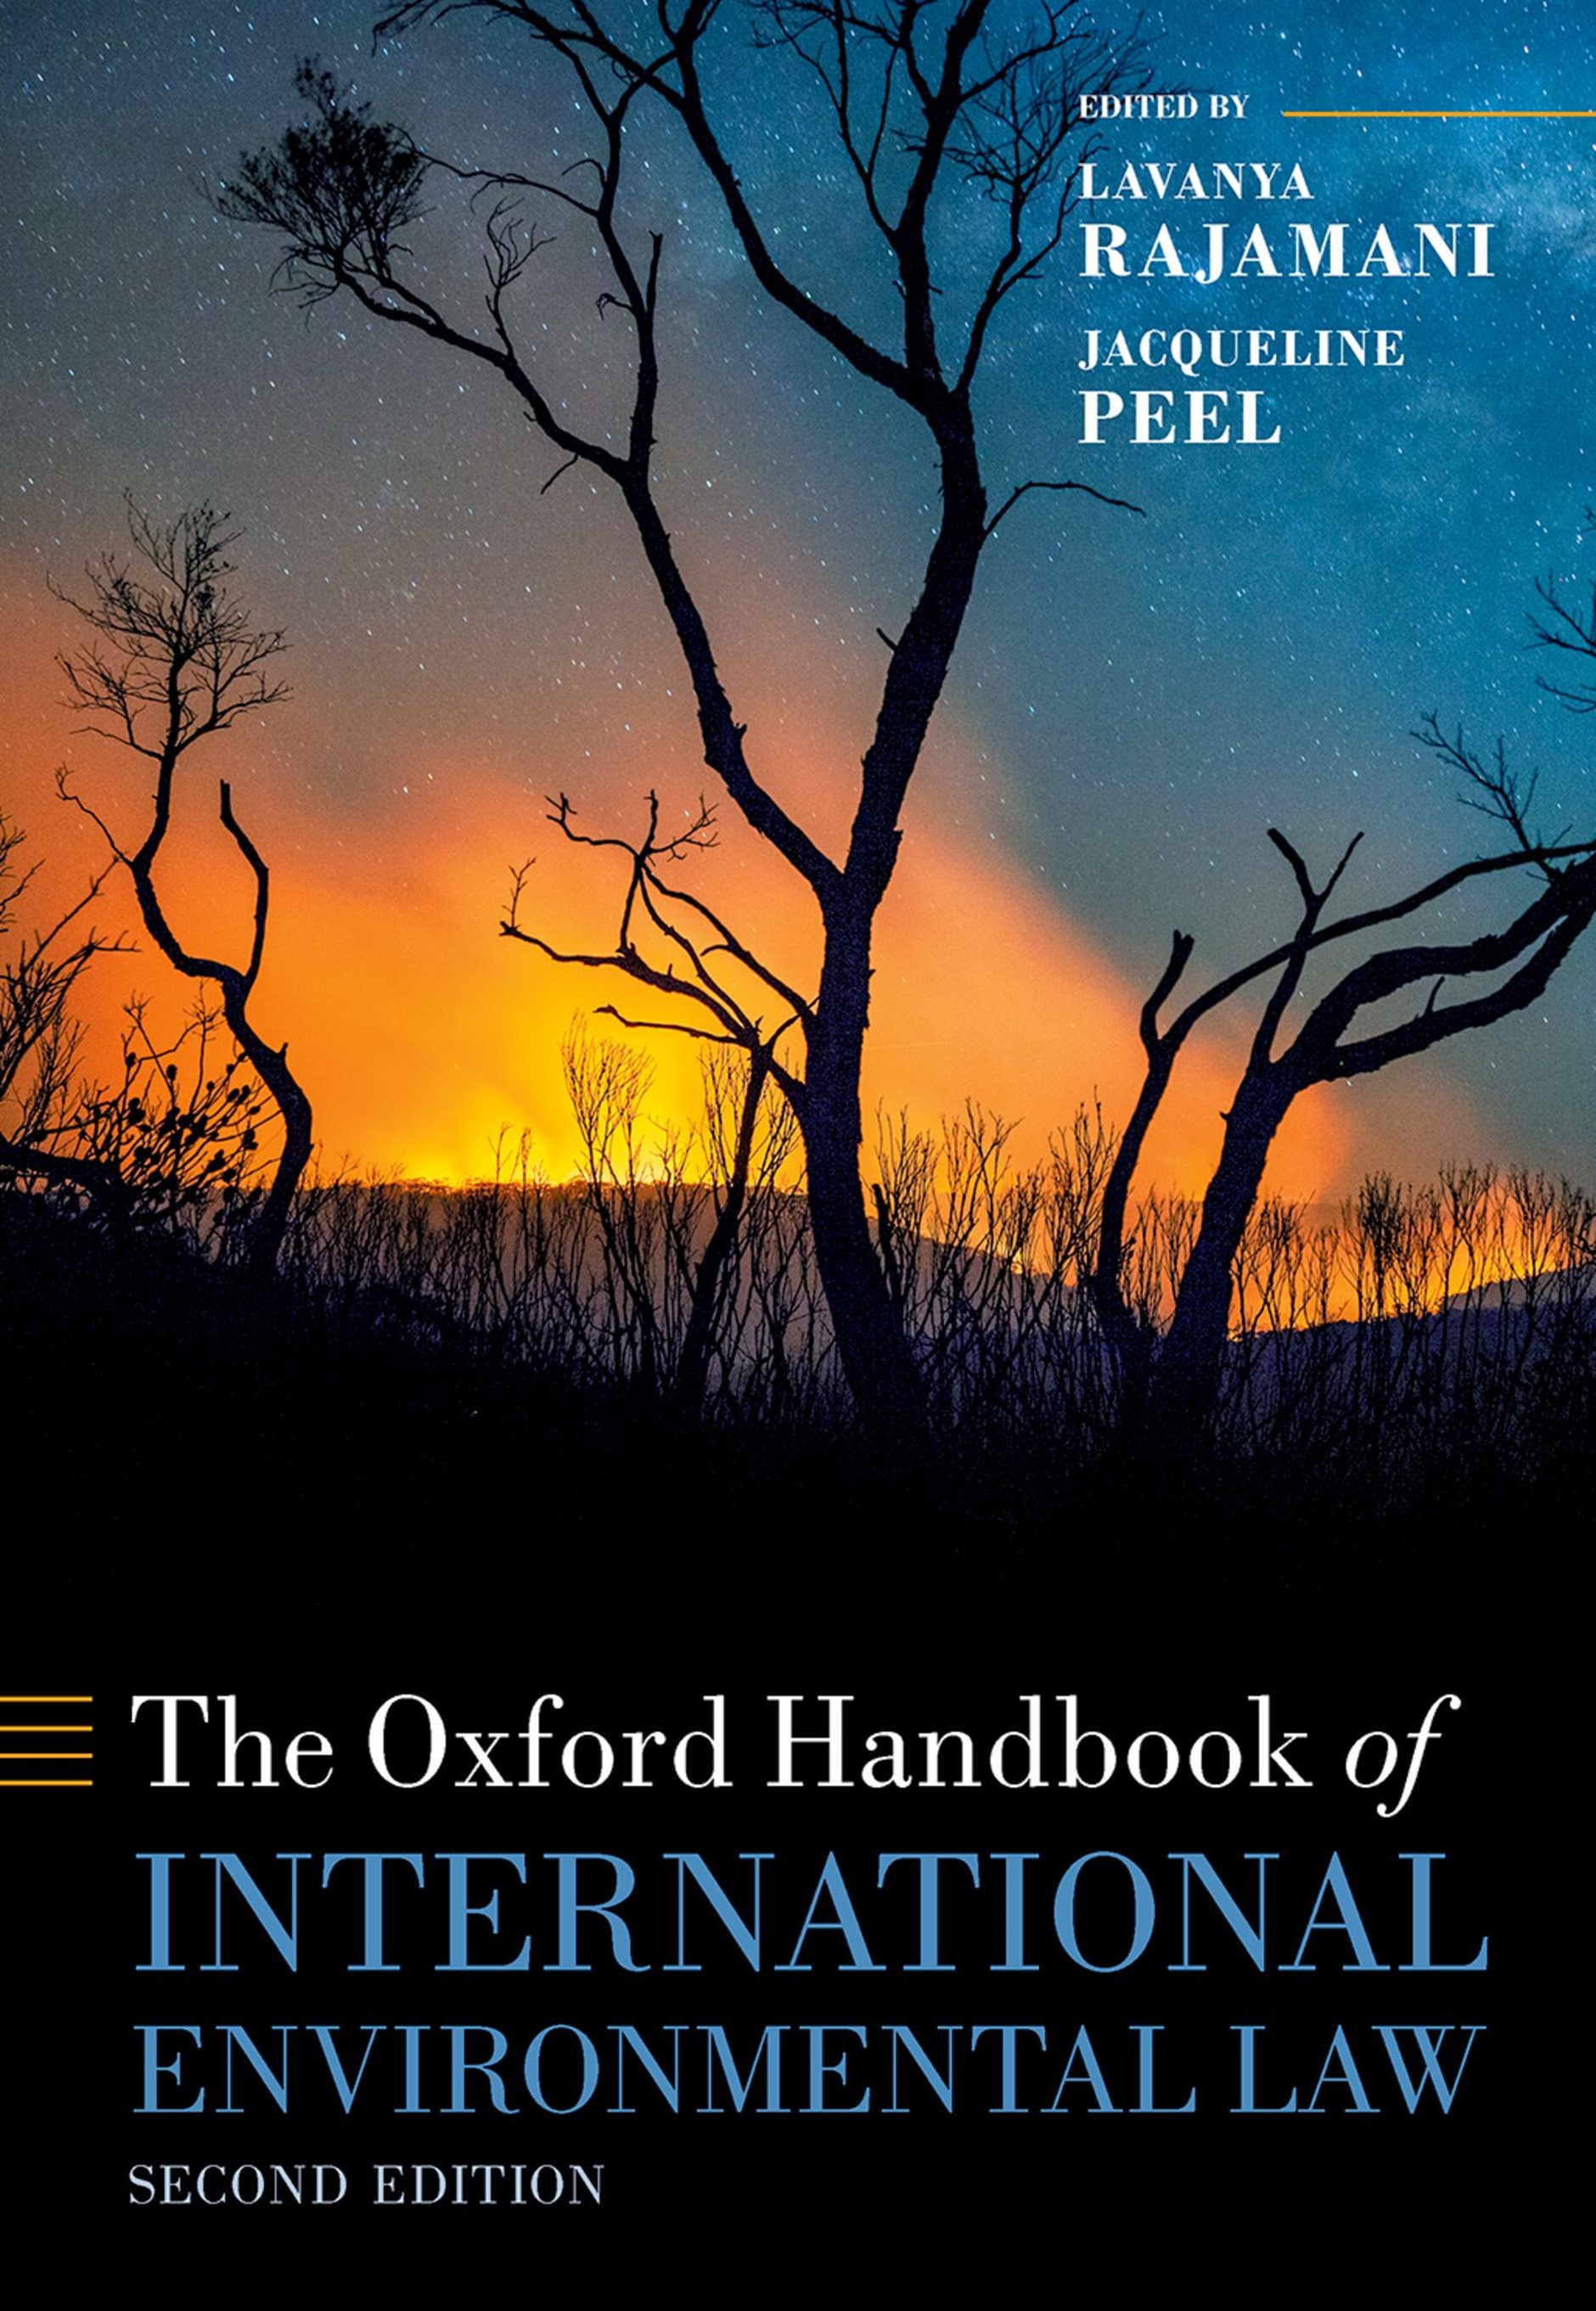 The Oxford Handbook of International Environmental Law (2nd edition, August 2021)